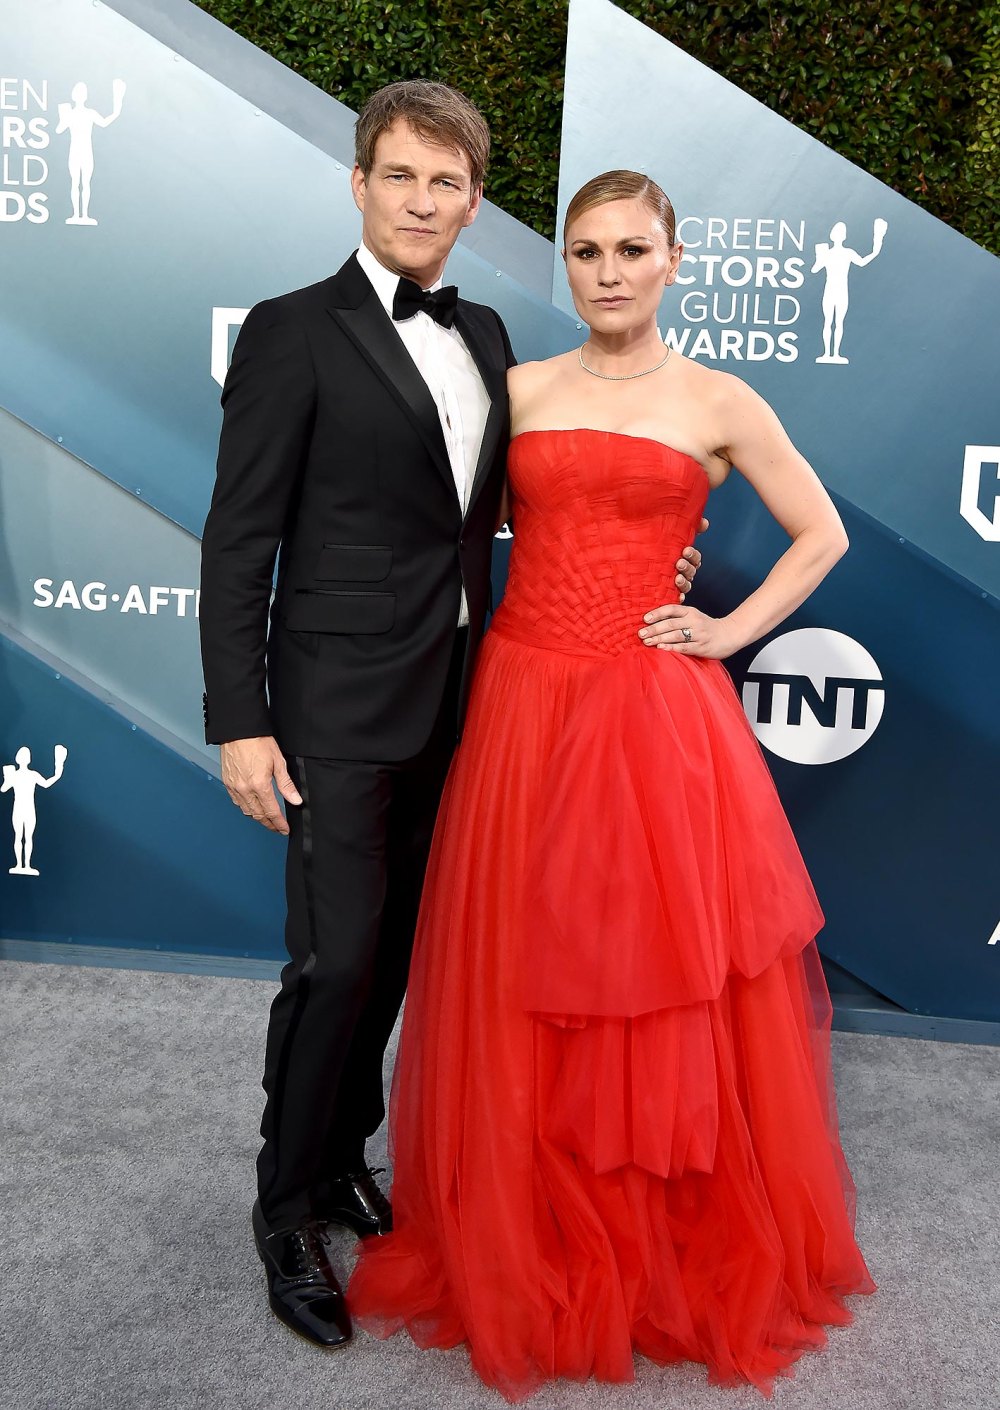 Anna Paquin and Stephen Moyer Relationship Timeline